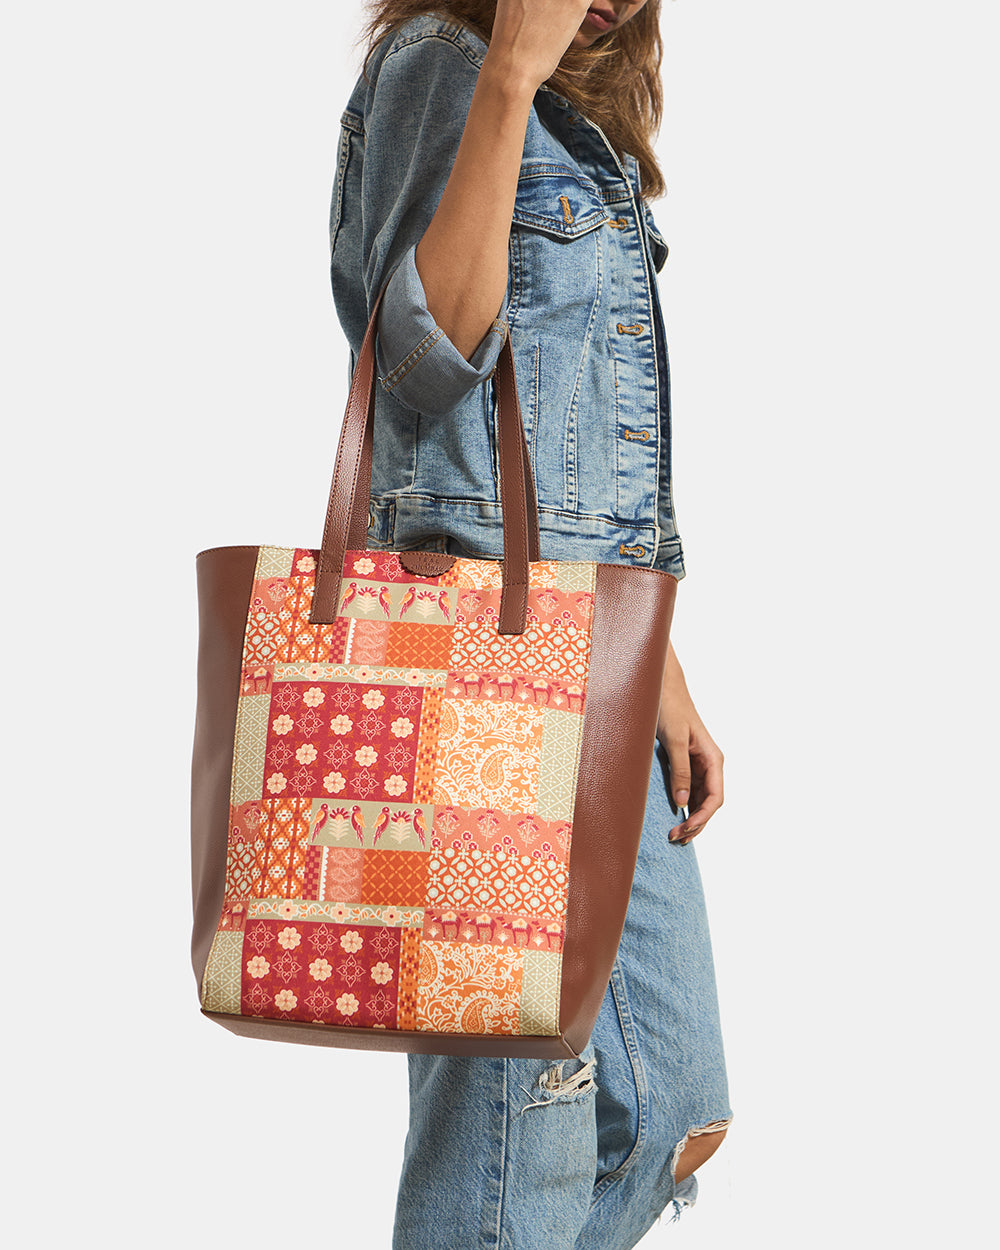 Teal by Chumbak |Terracota Patches & Prints Shopper Tote